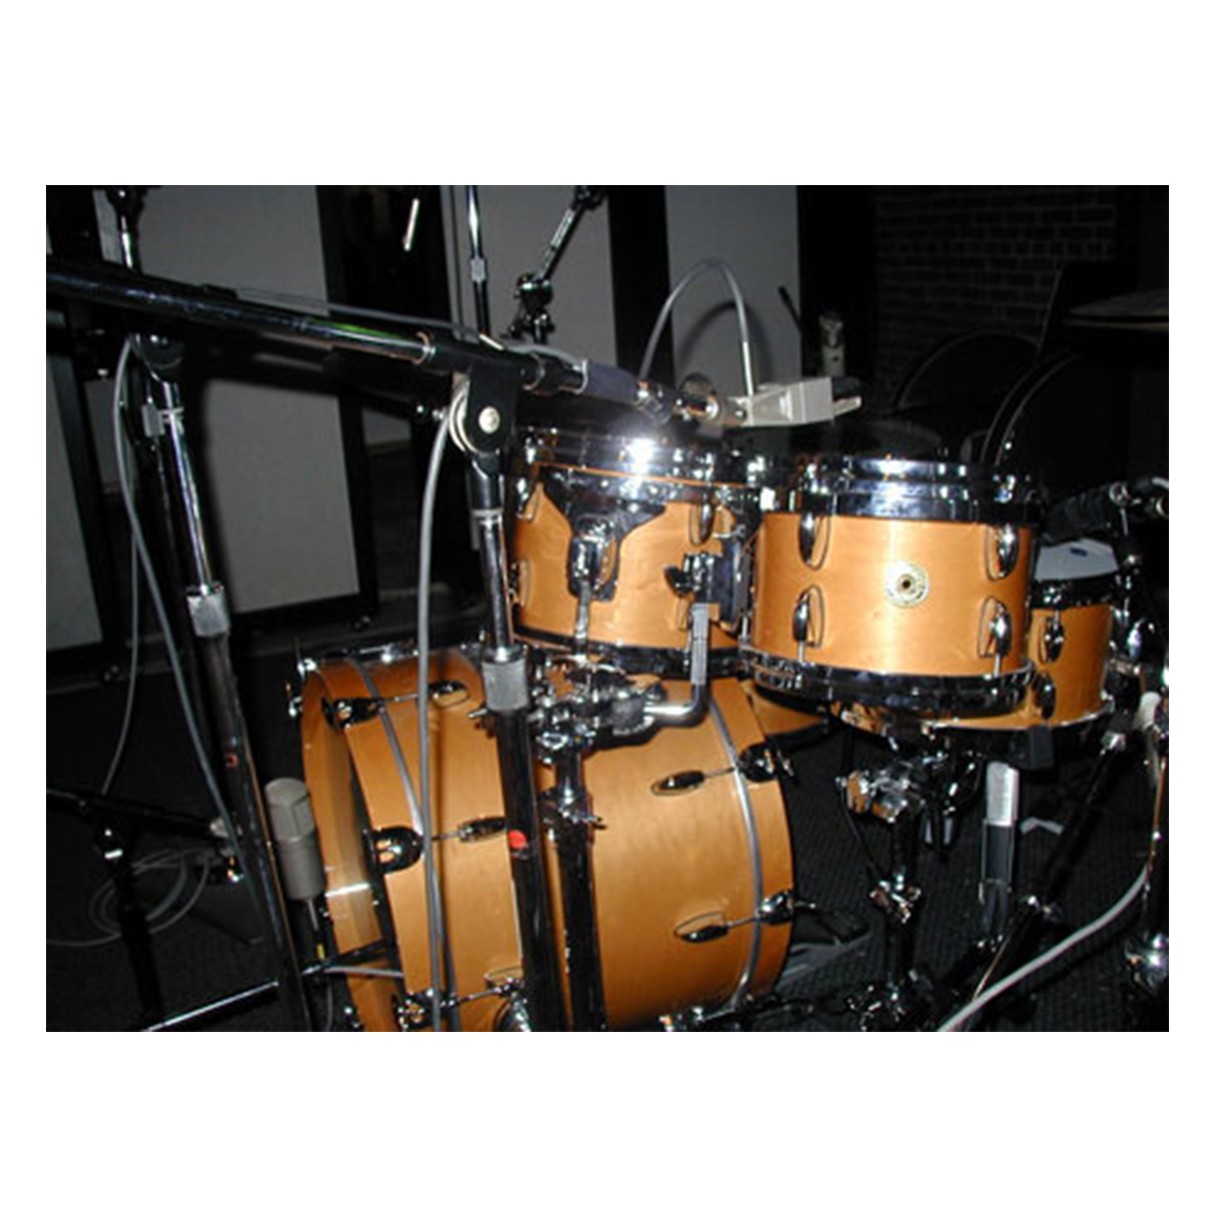 bfd2 drums